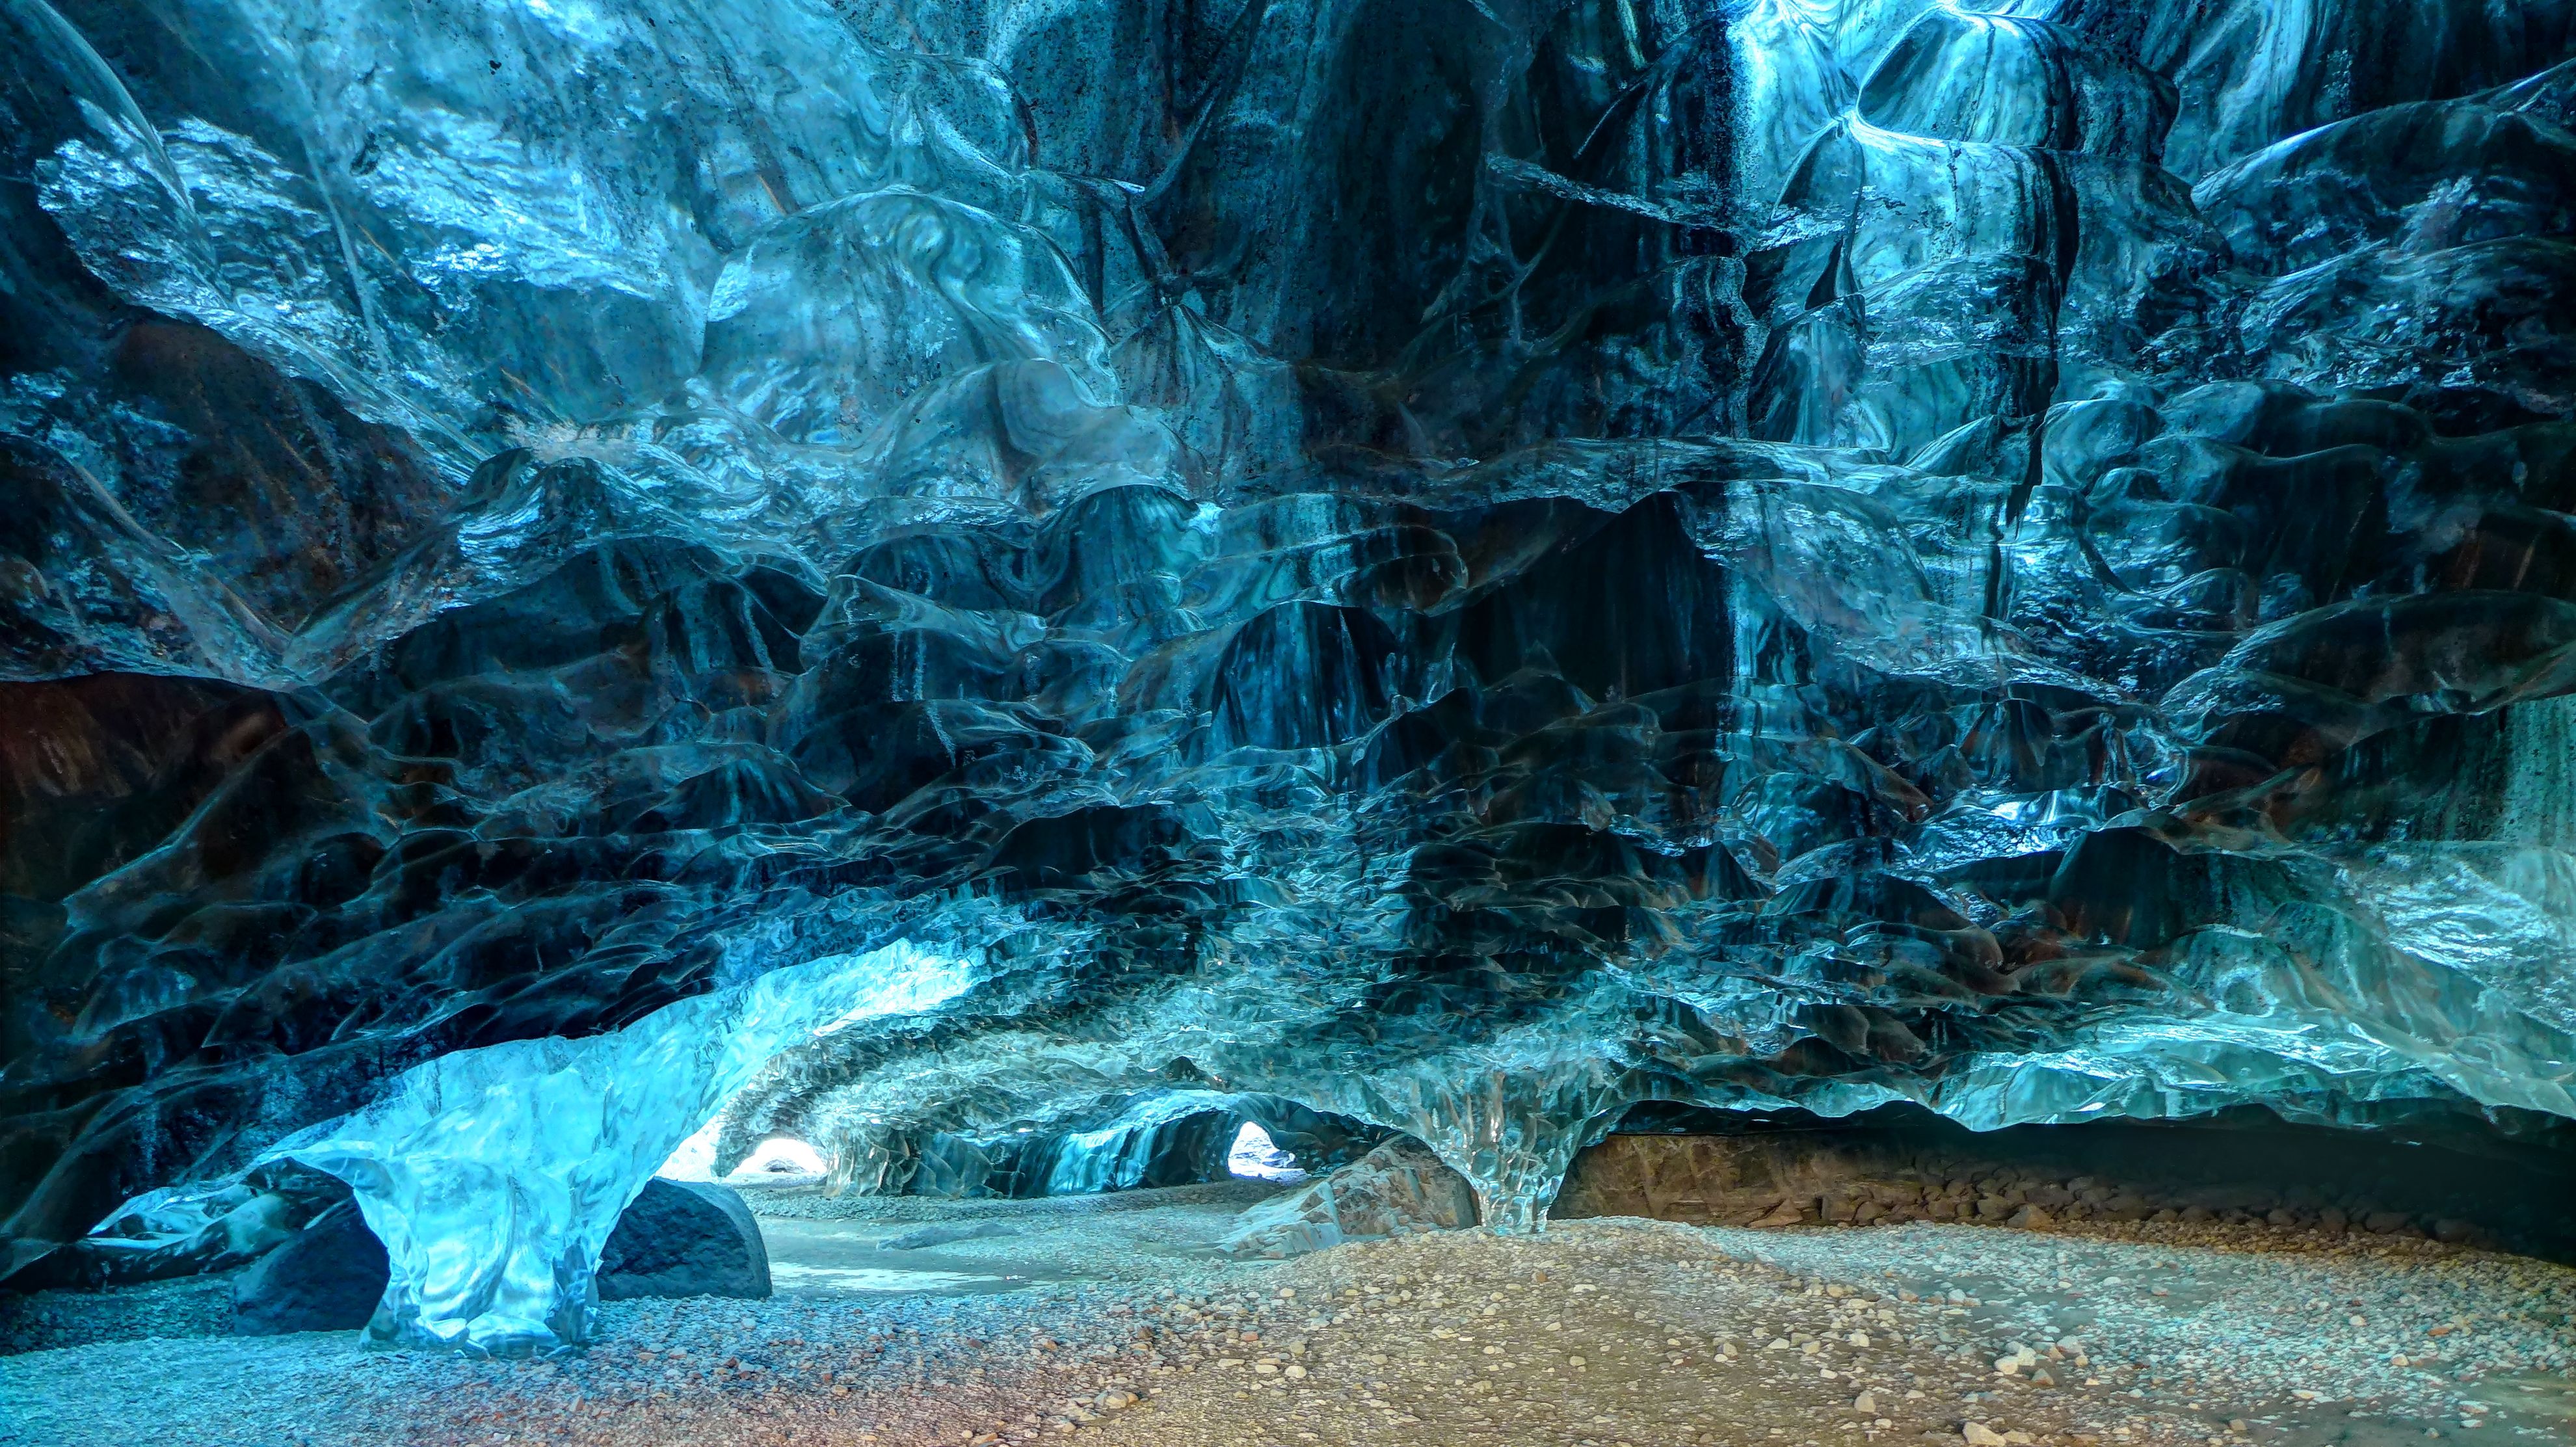 Ice Cave wallpaper, Earth, HQ Ice Cave pictureK Wallpaper 2019